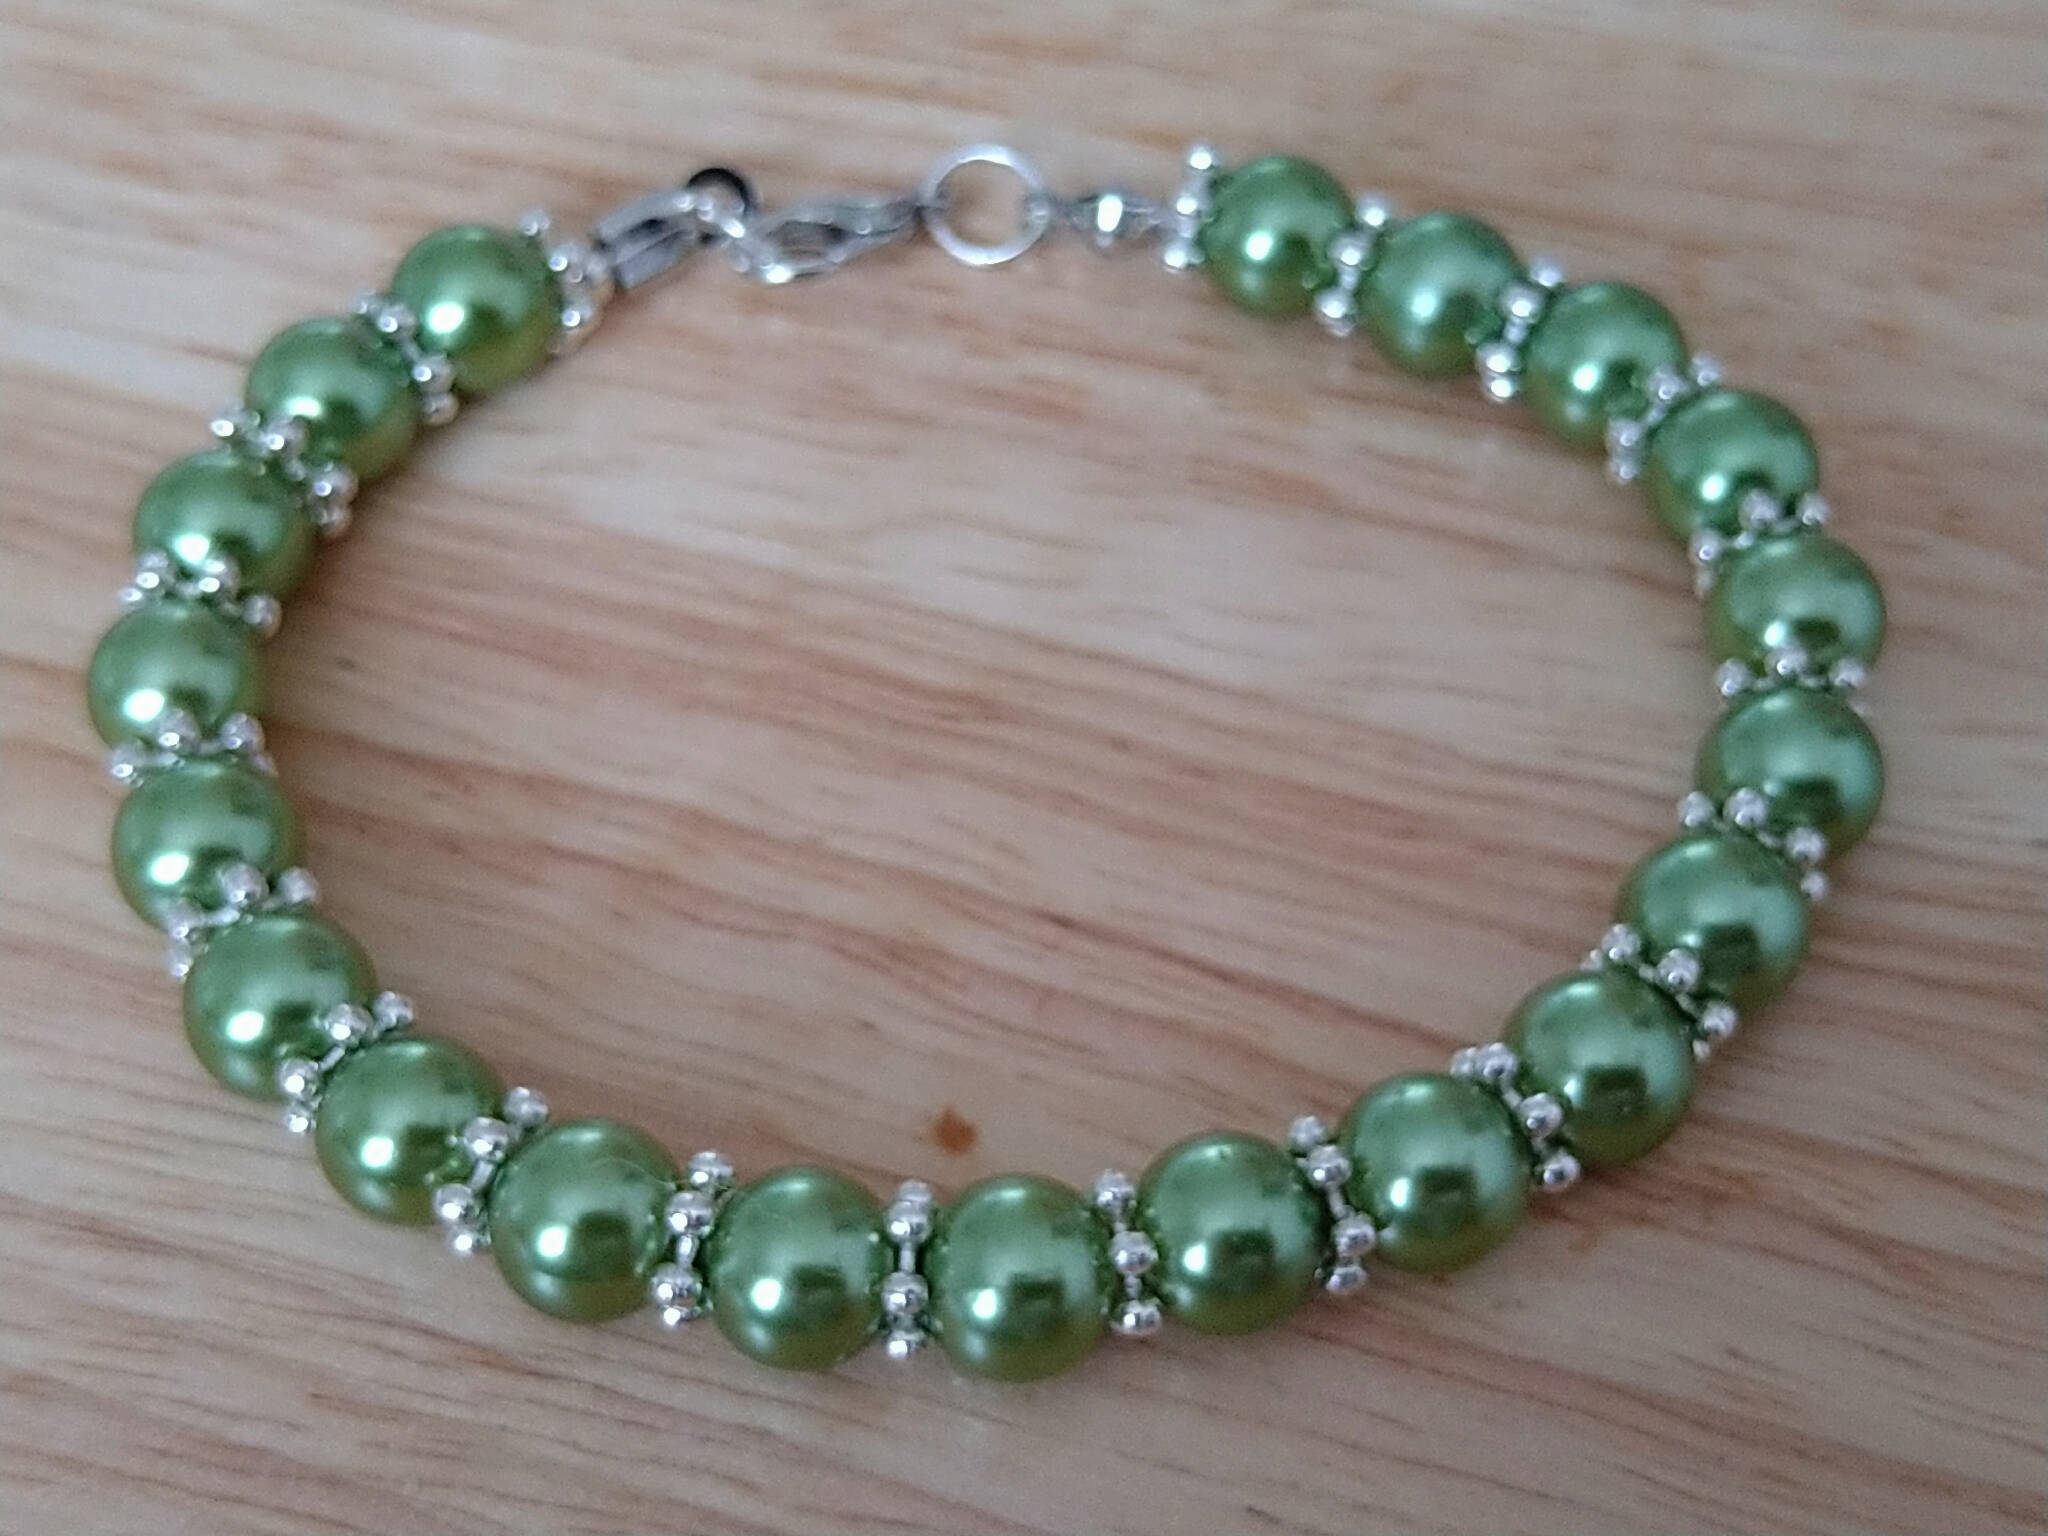 Green bracelet with silver coloured daisy spacers. Recycled beads